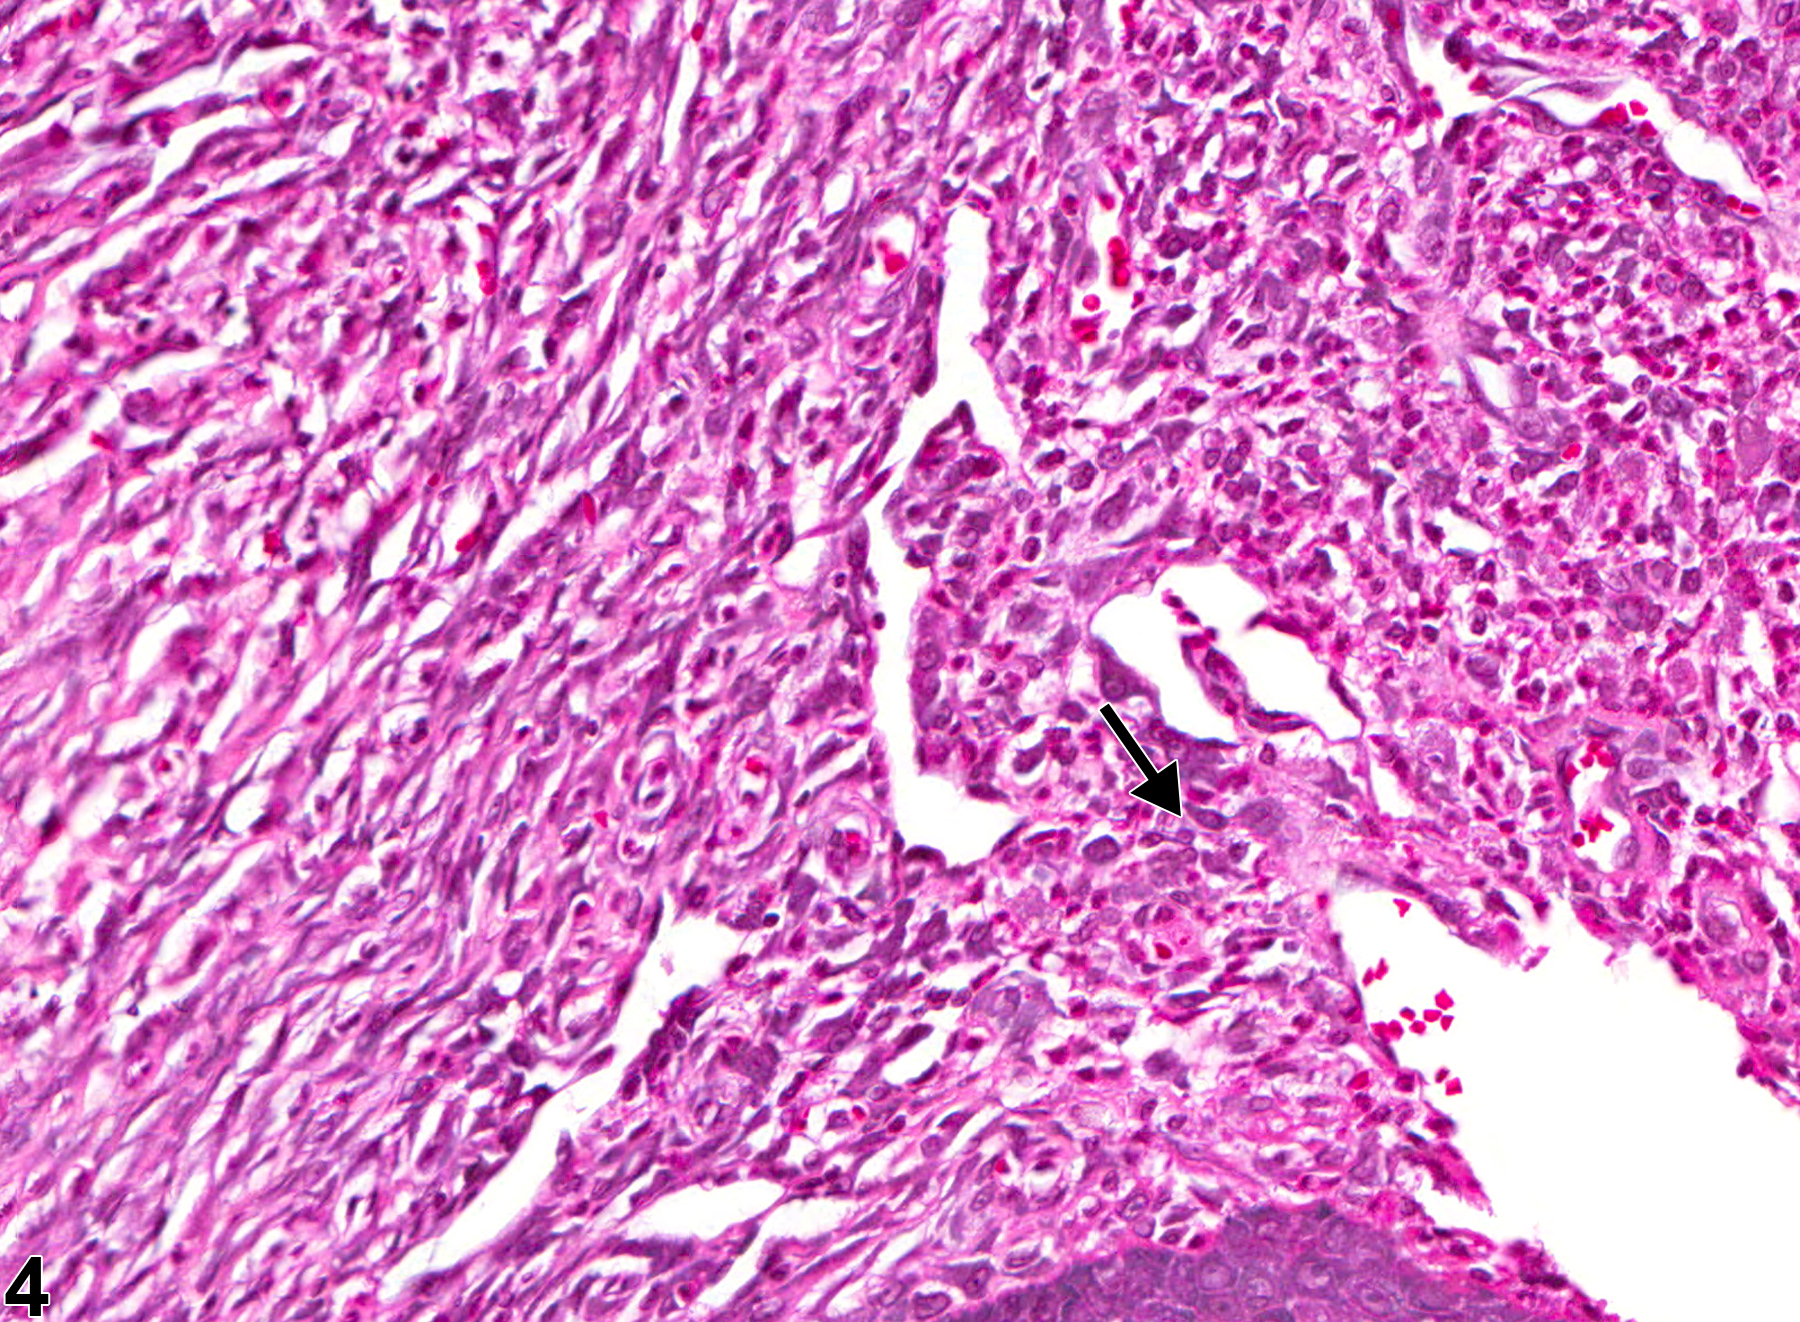 Image of inflammation in the oral mucosa from a male F344/N rat in a chronic study